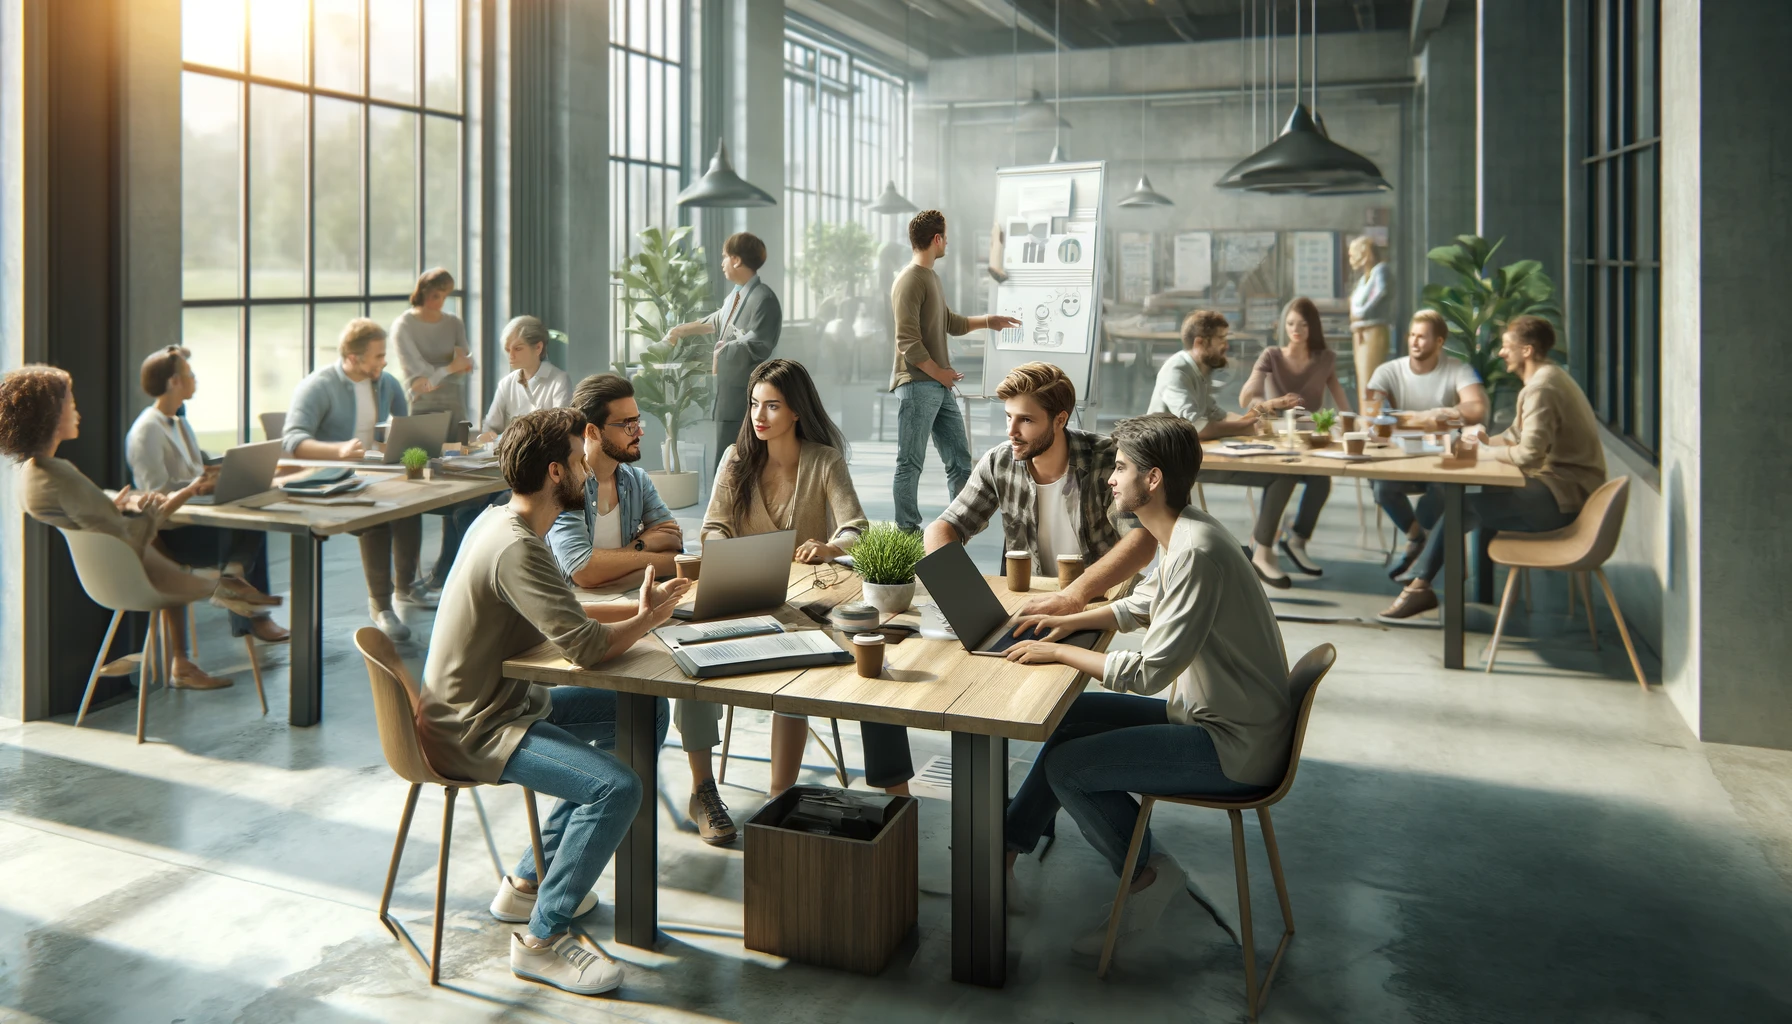 A diverse group of entrepreneurs engaged in a lively discussion in a modern coworking space, surrounded by laptops, documents, and collaborative tools, exuding energy and innovation.